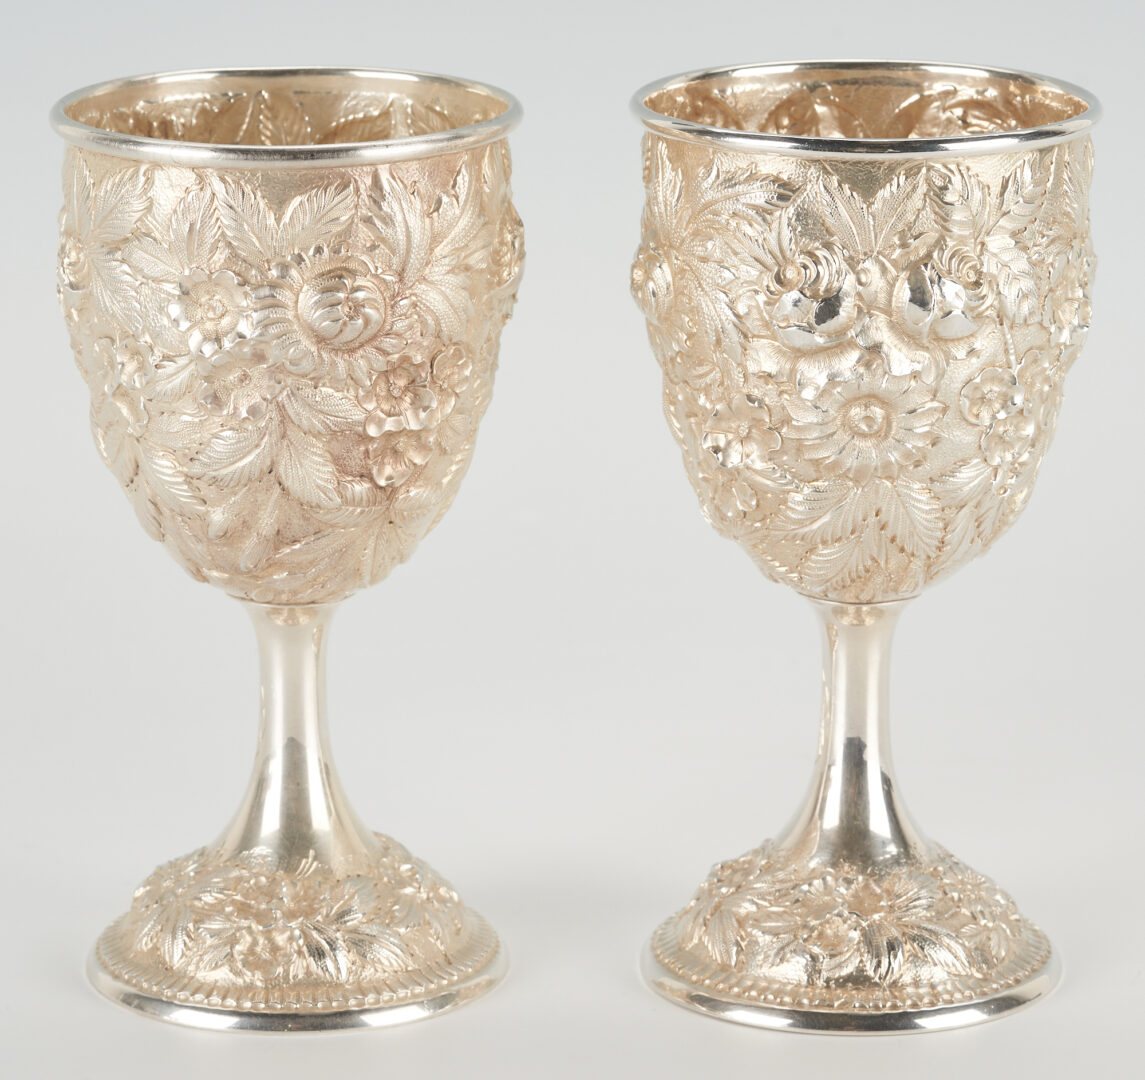 Lot 46: Set of 12 Kirk Repousse Sterling Silver Goblets, Hand Decorated